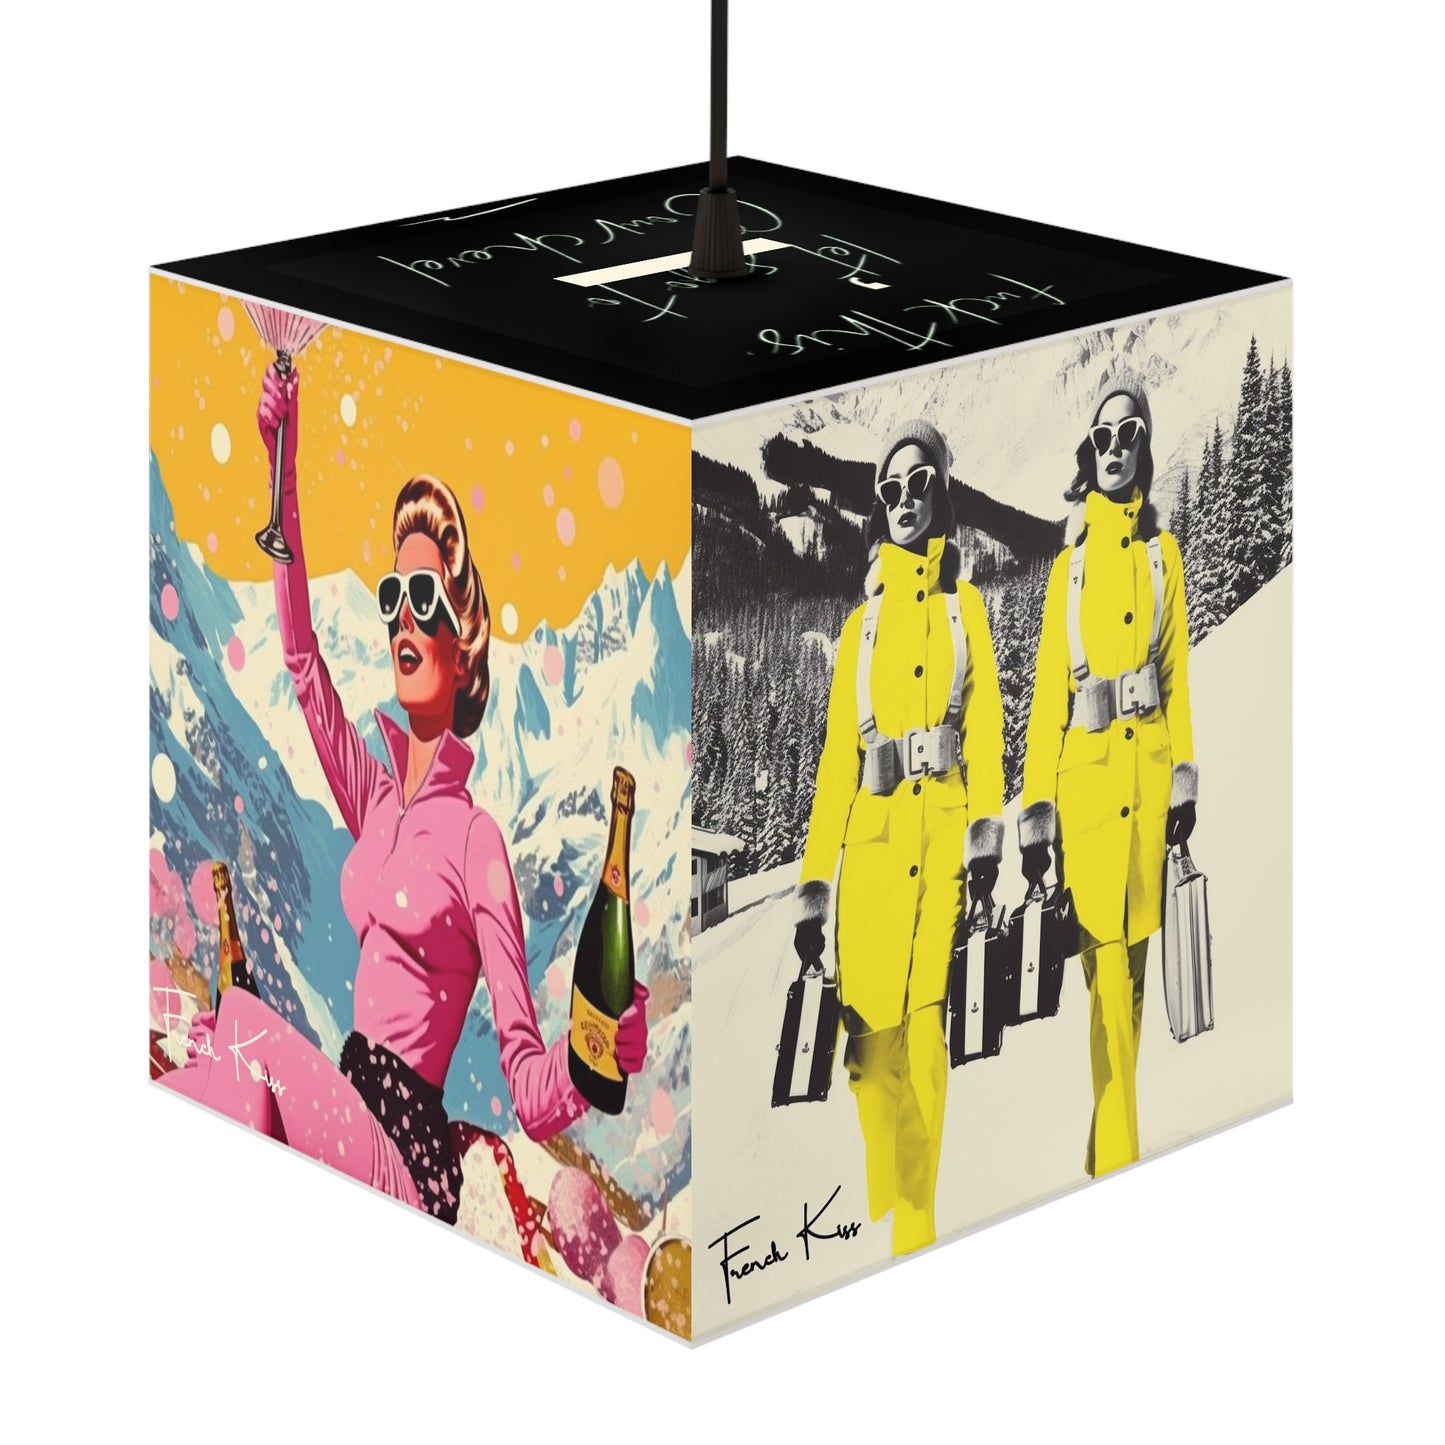 APRES SKI Sexy Chic Light Cube Lamp, French Kiss Glamour Lifestyle Fashion Haute Couture Travel Pop Art Interior Designer Luxe Luxury